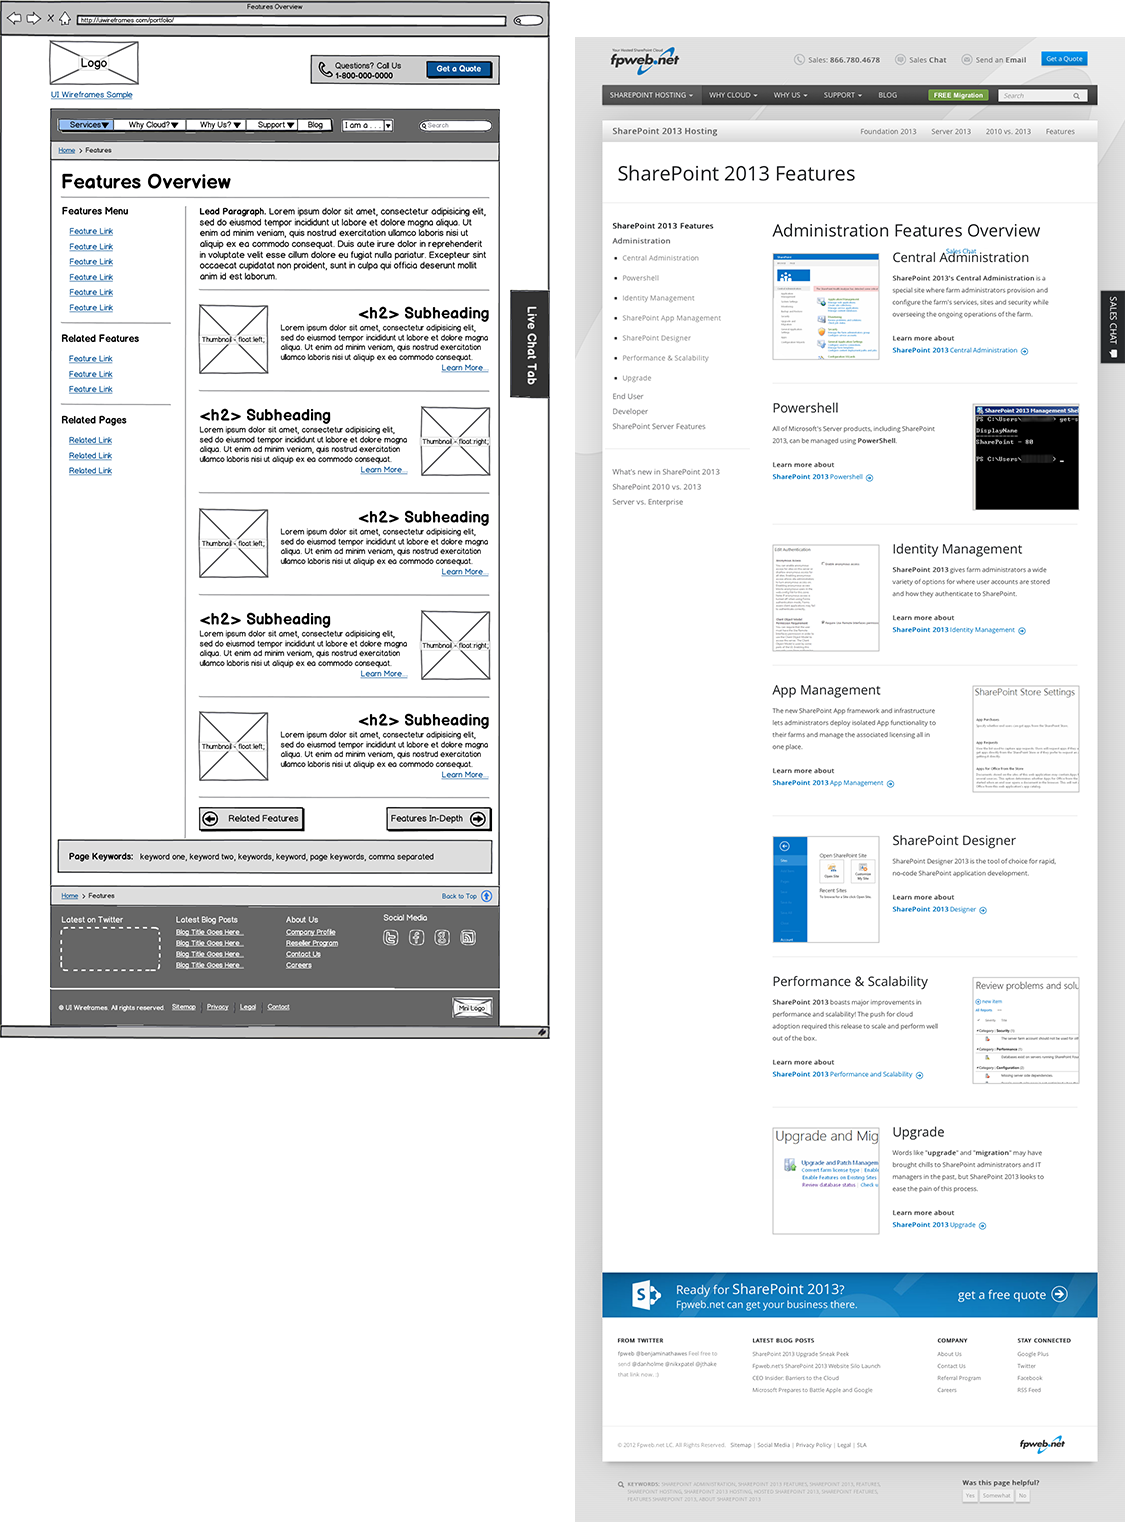 Website Wireframe Thumbnail